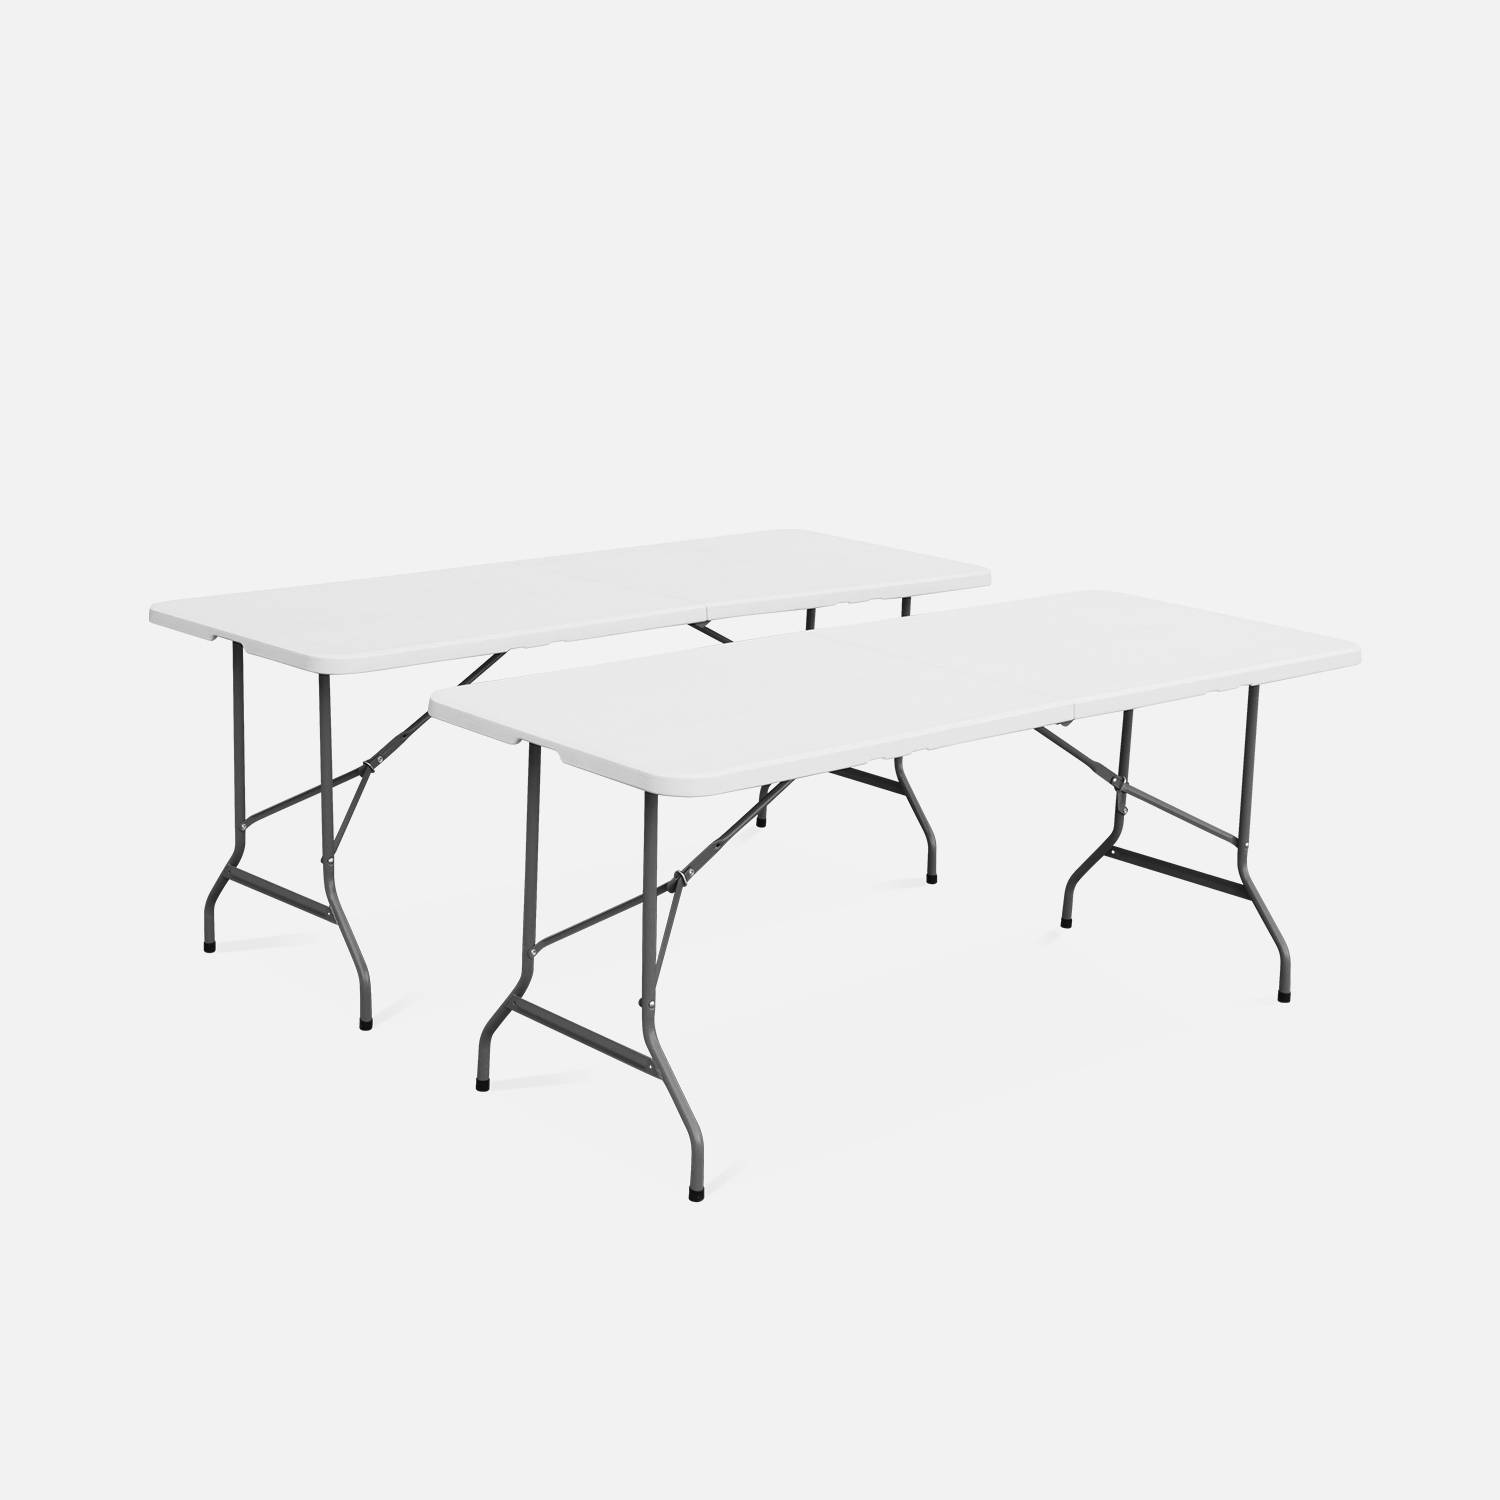 Set of 2 reception tables, 180cm, foldable, with carrying handle | sweeek